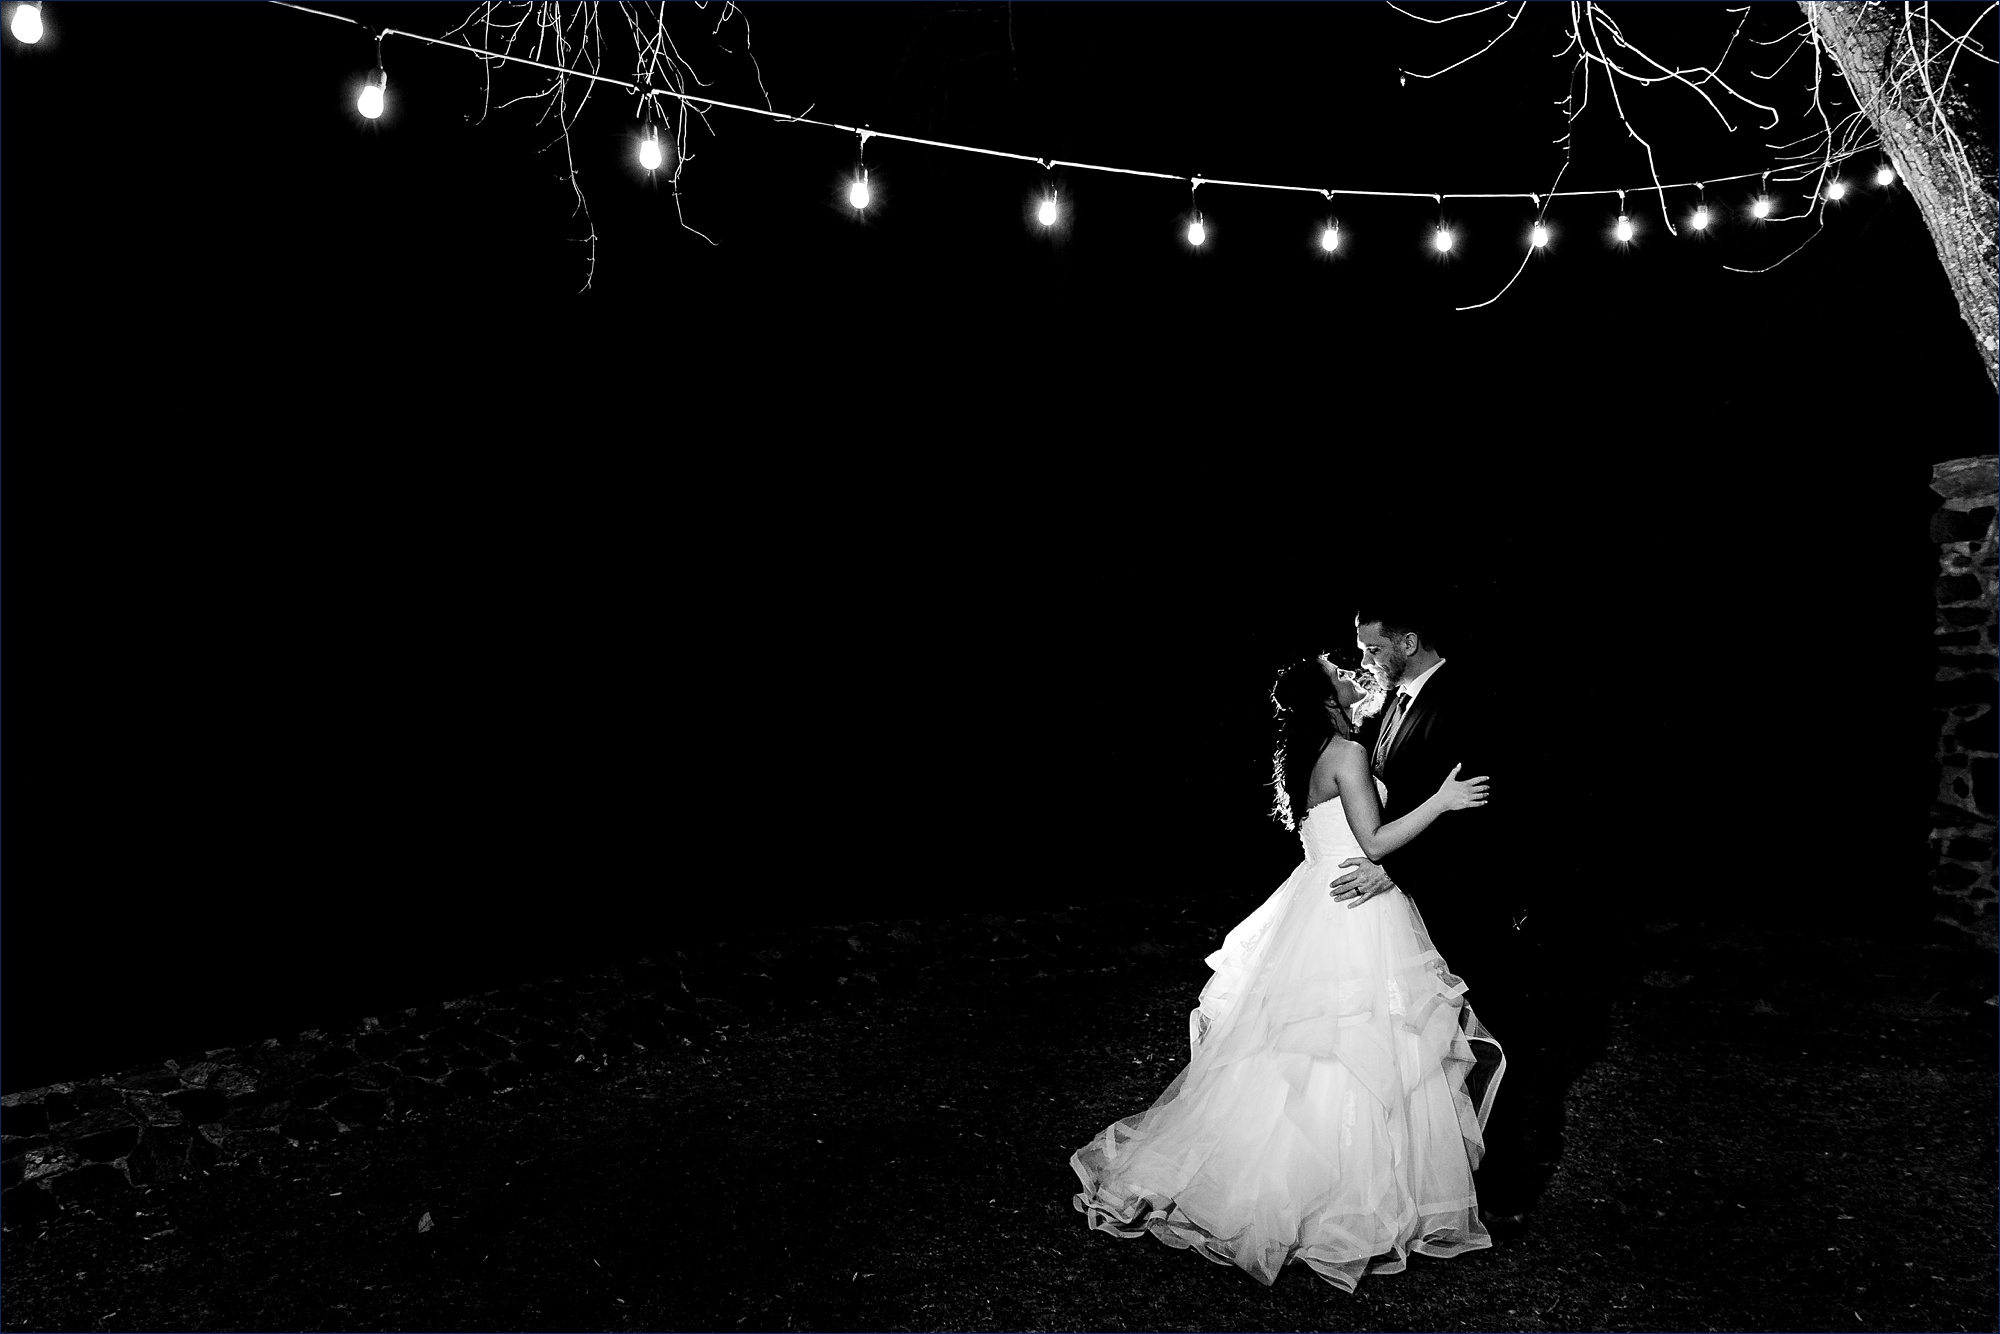 The bride and groom get outside for some night portraits on their wedding day